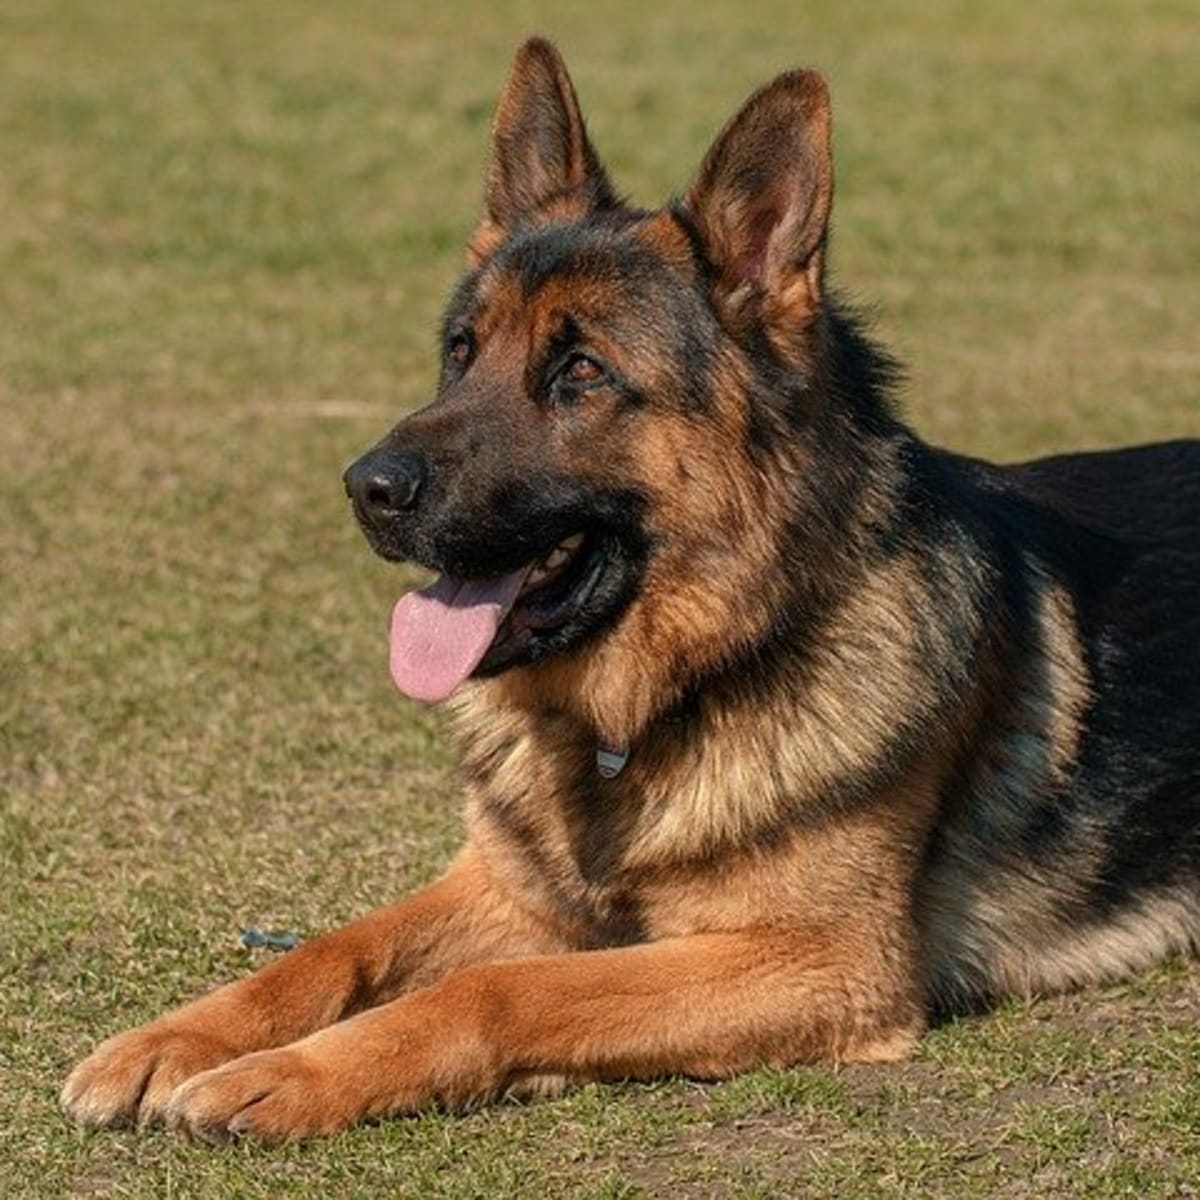 Download Tips For German Shepherd Dog Training Pethelpful By Fellow Animal Lovers And Experts